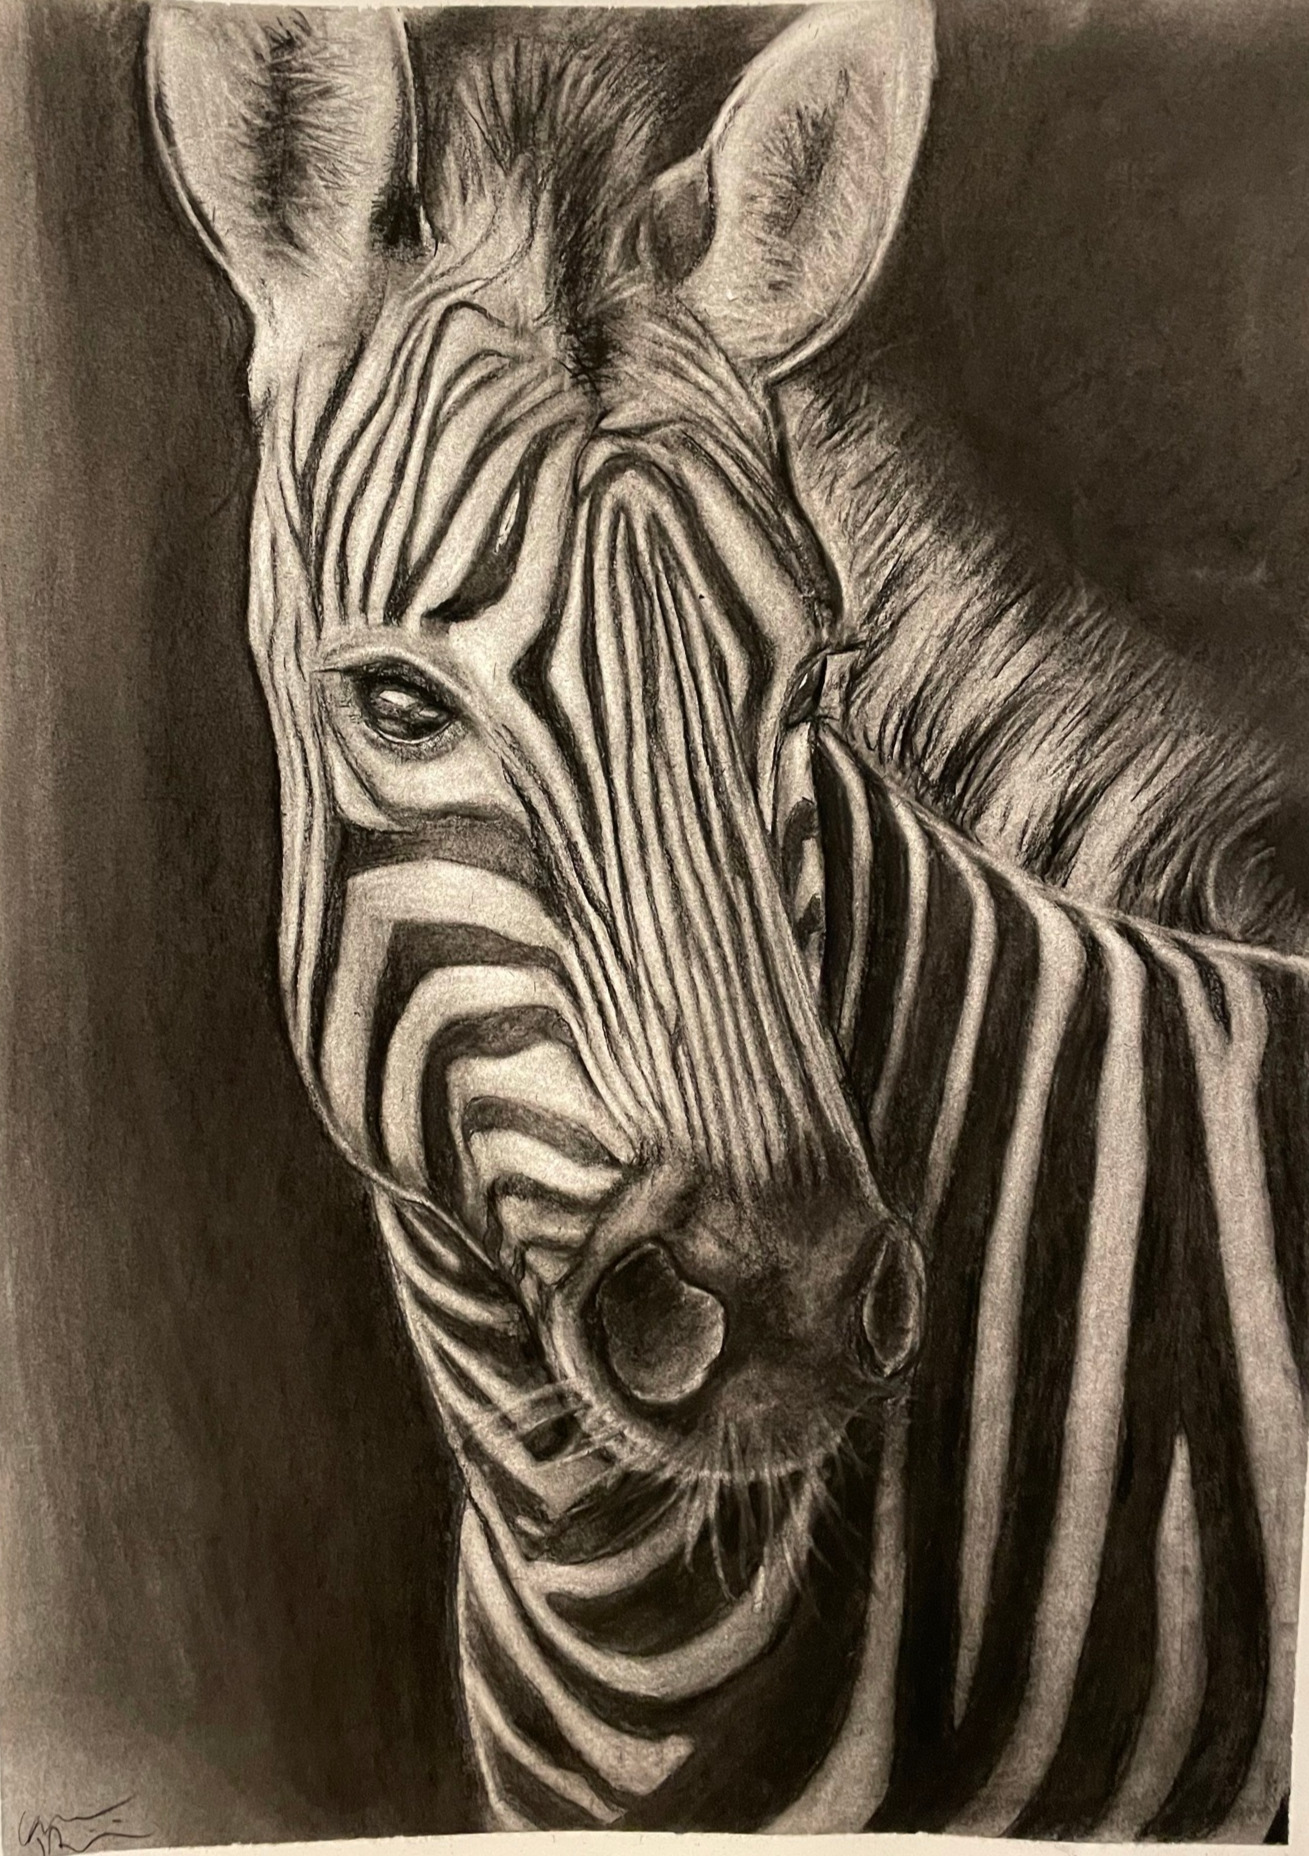 Charcoal illustration of a zebra from the neck up on a black background